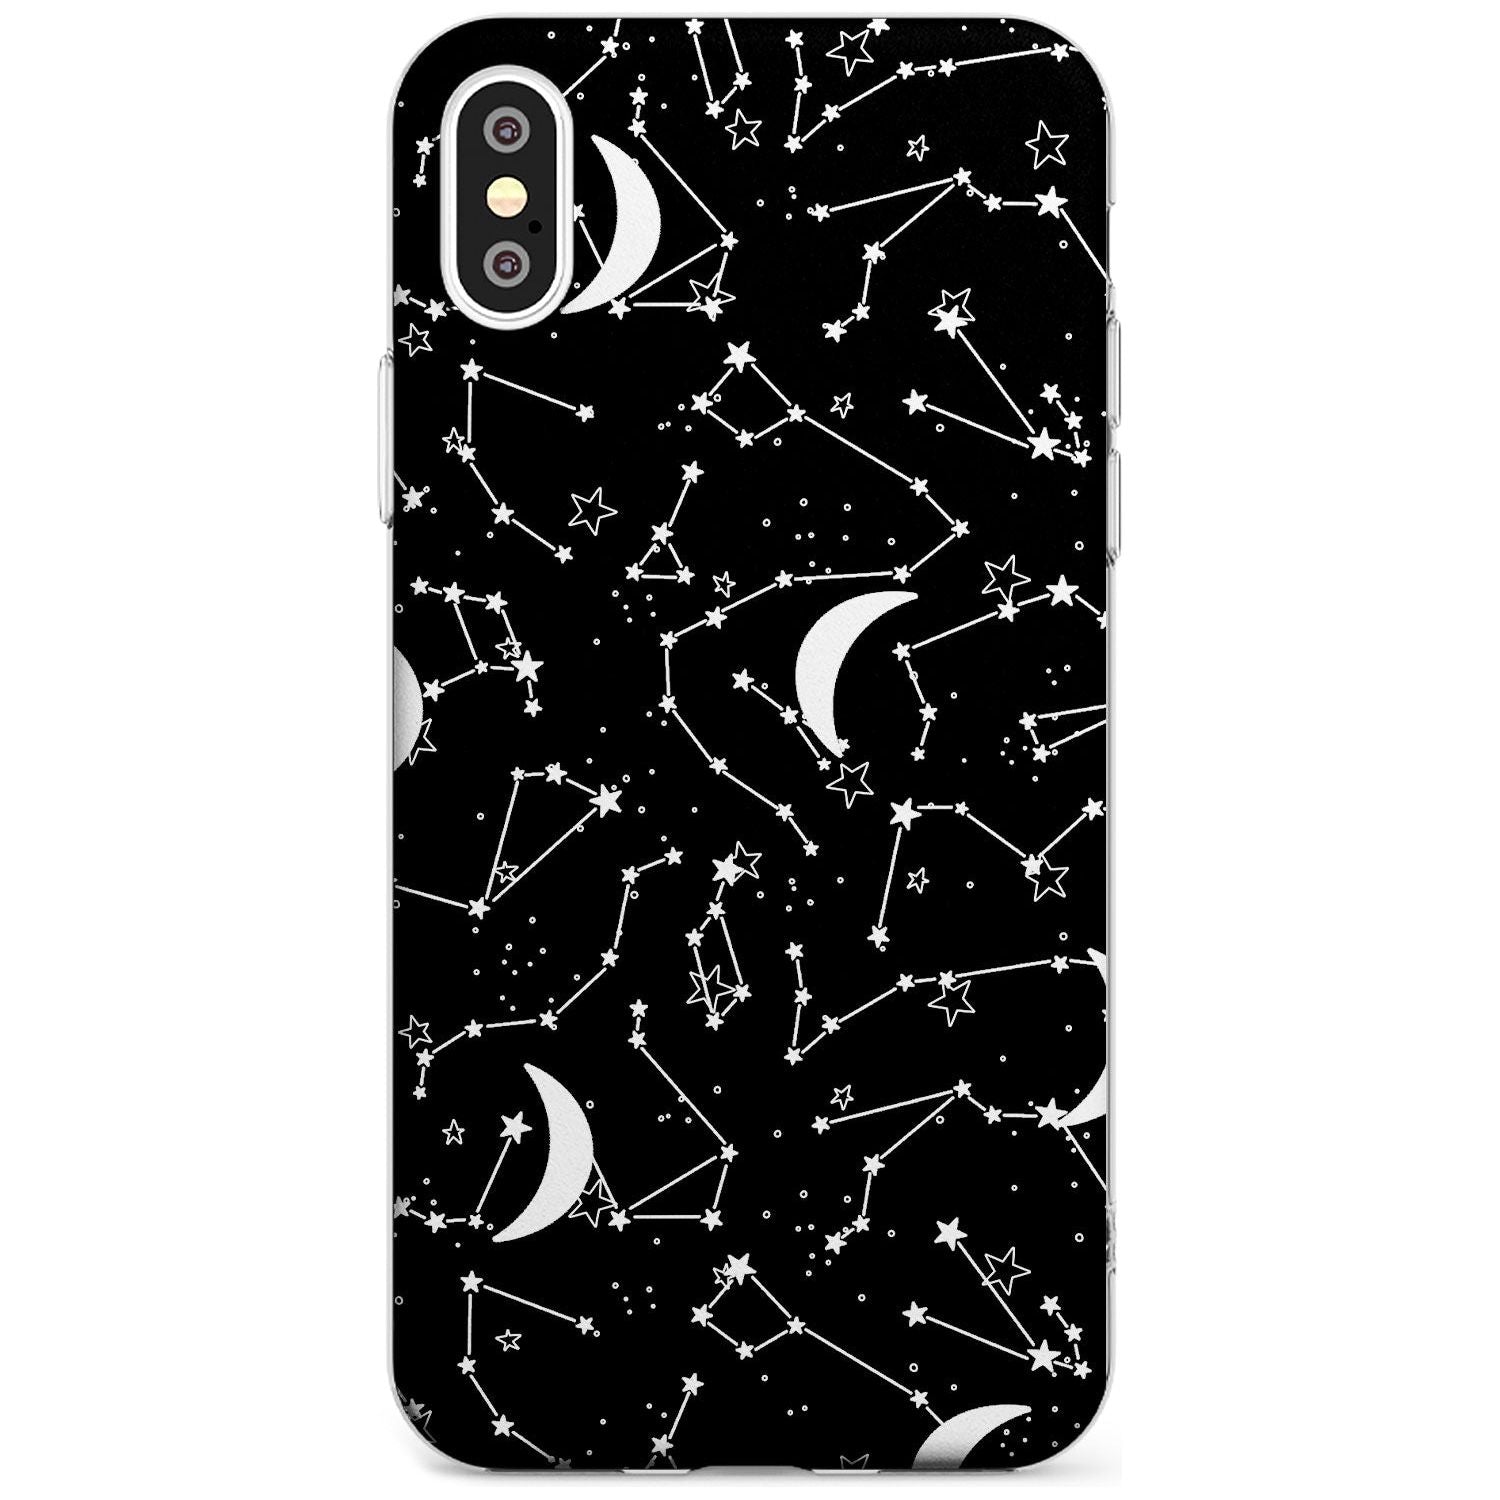 White Constellations on Black Black Impact Phone Case for iPhone X XS Max XR